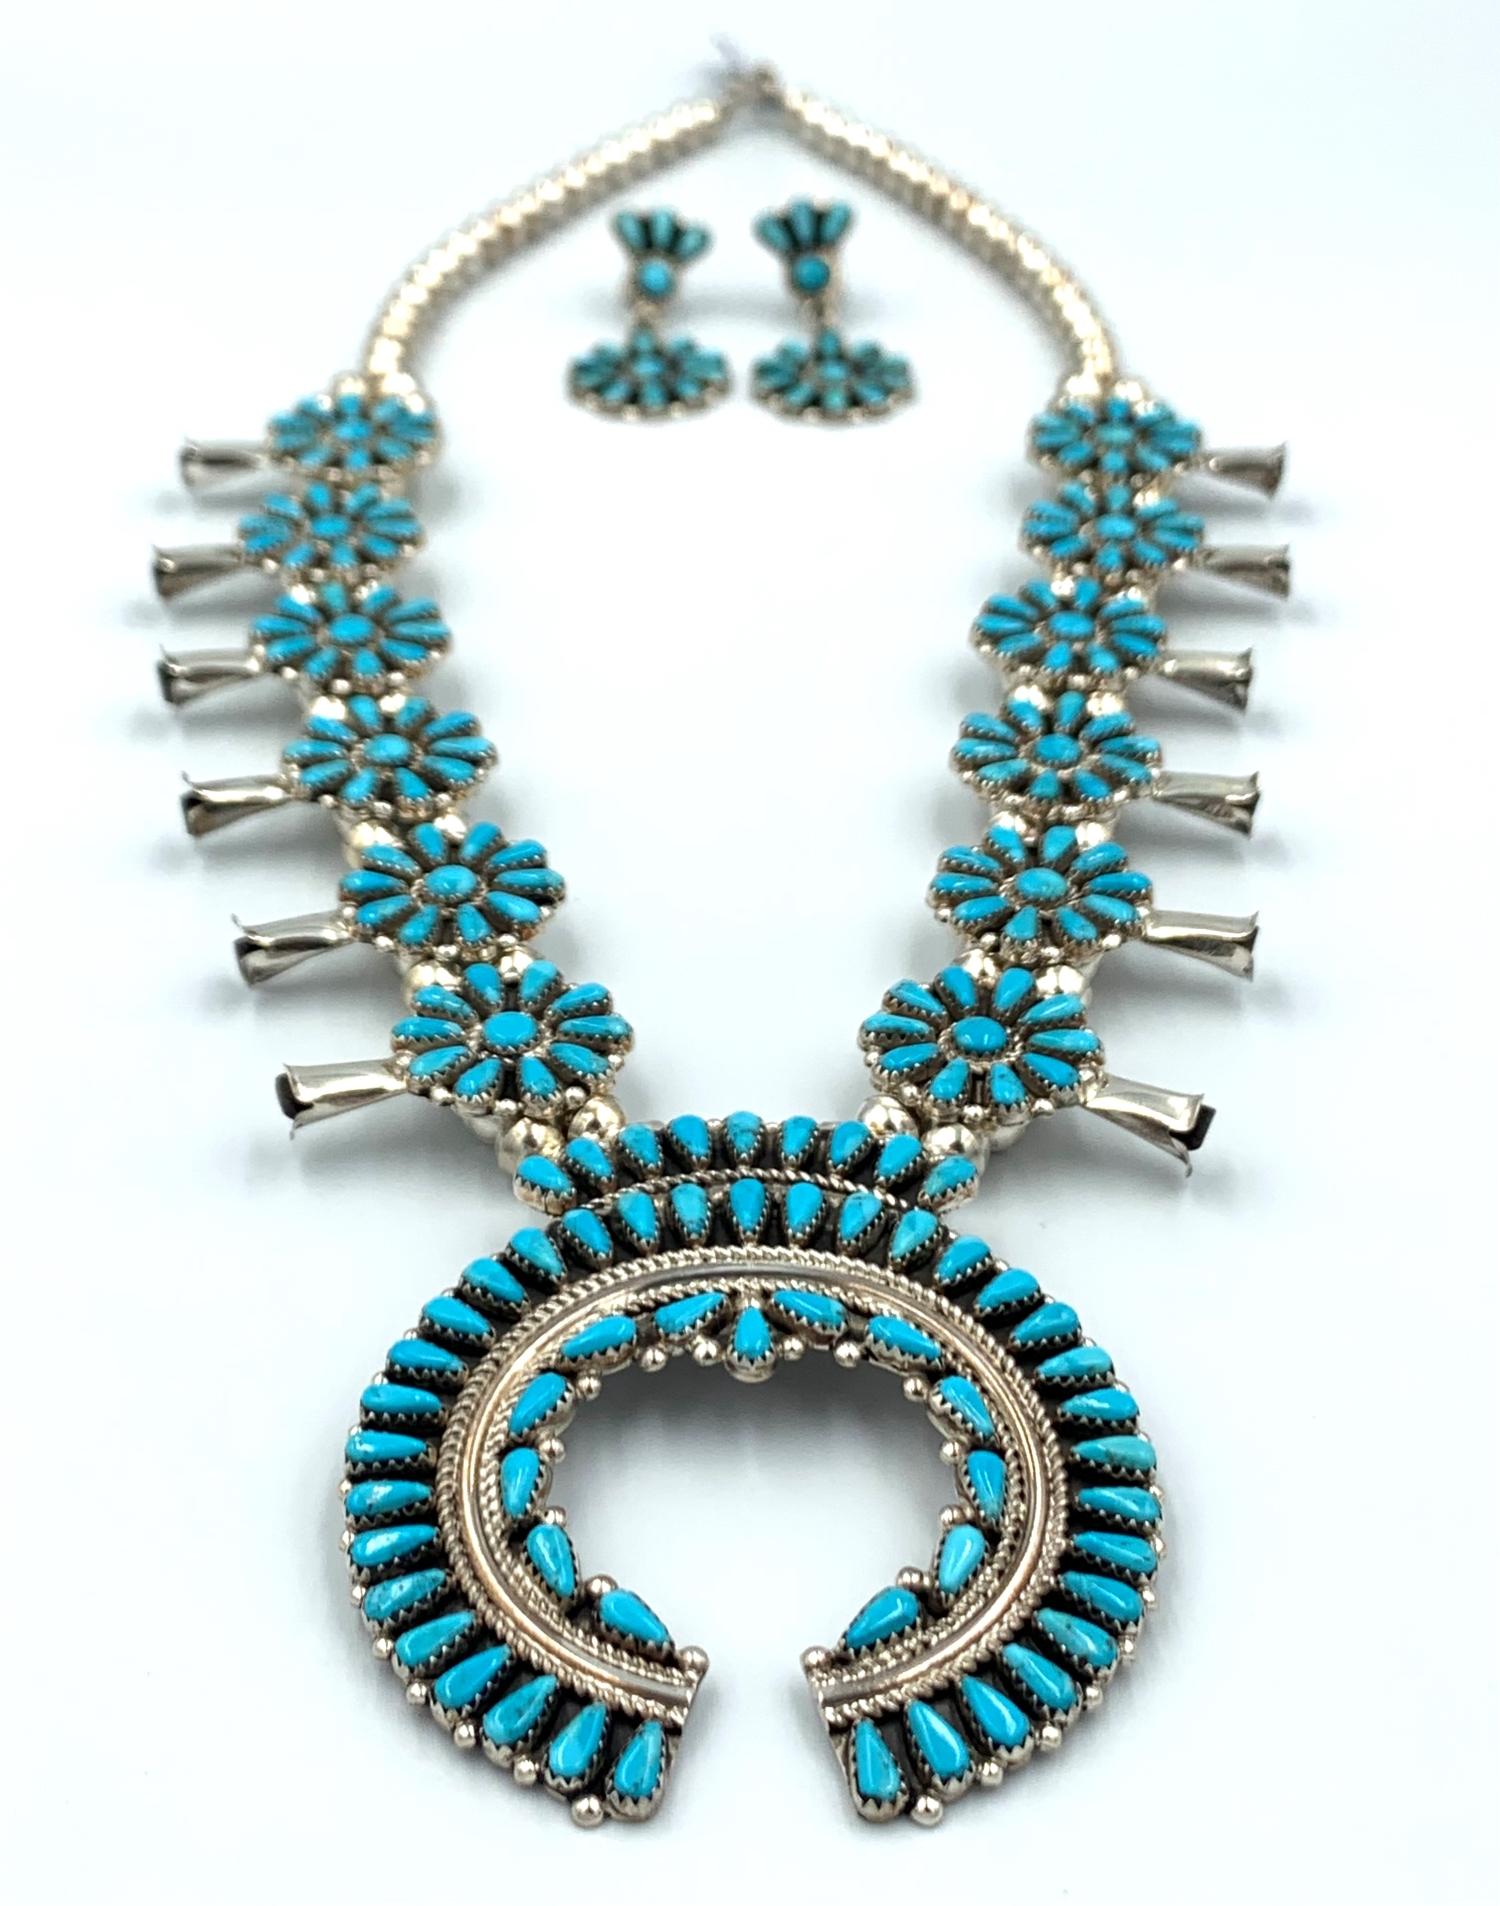 Native American Sleeping Beauty Turquoise Squash Blossom Necklace and Earring Set by Violet Nez For Sale